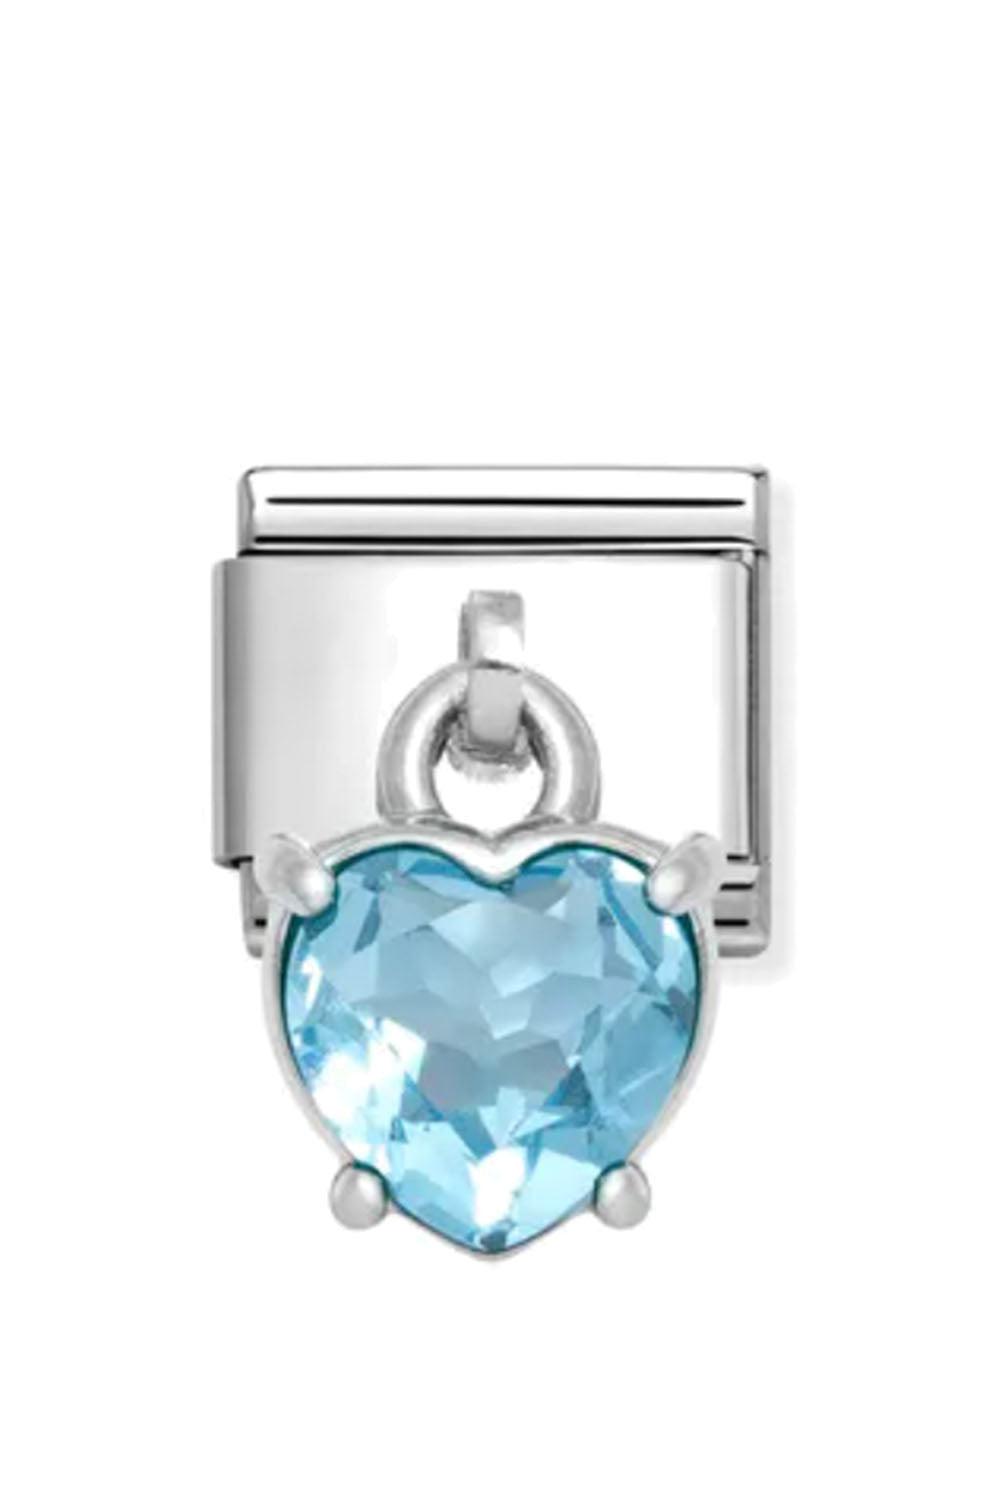 CHARMS 925 Sterling Silver and CZ Heart Cut Light Blue CZ